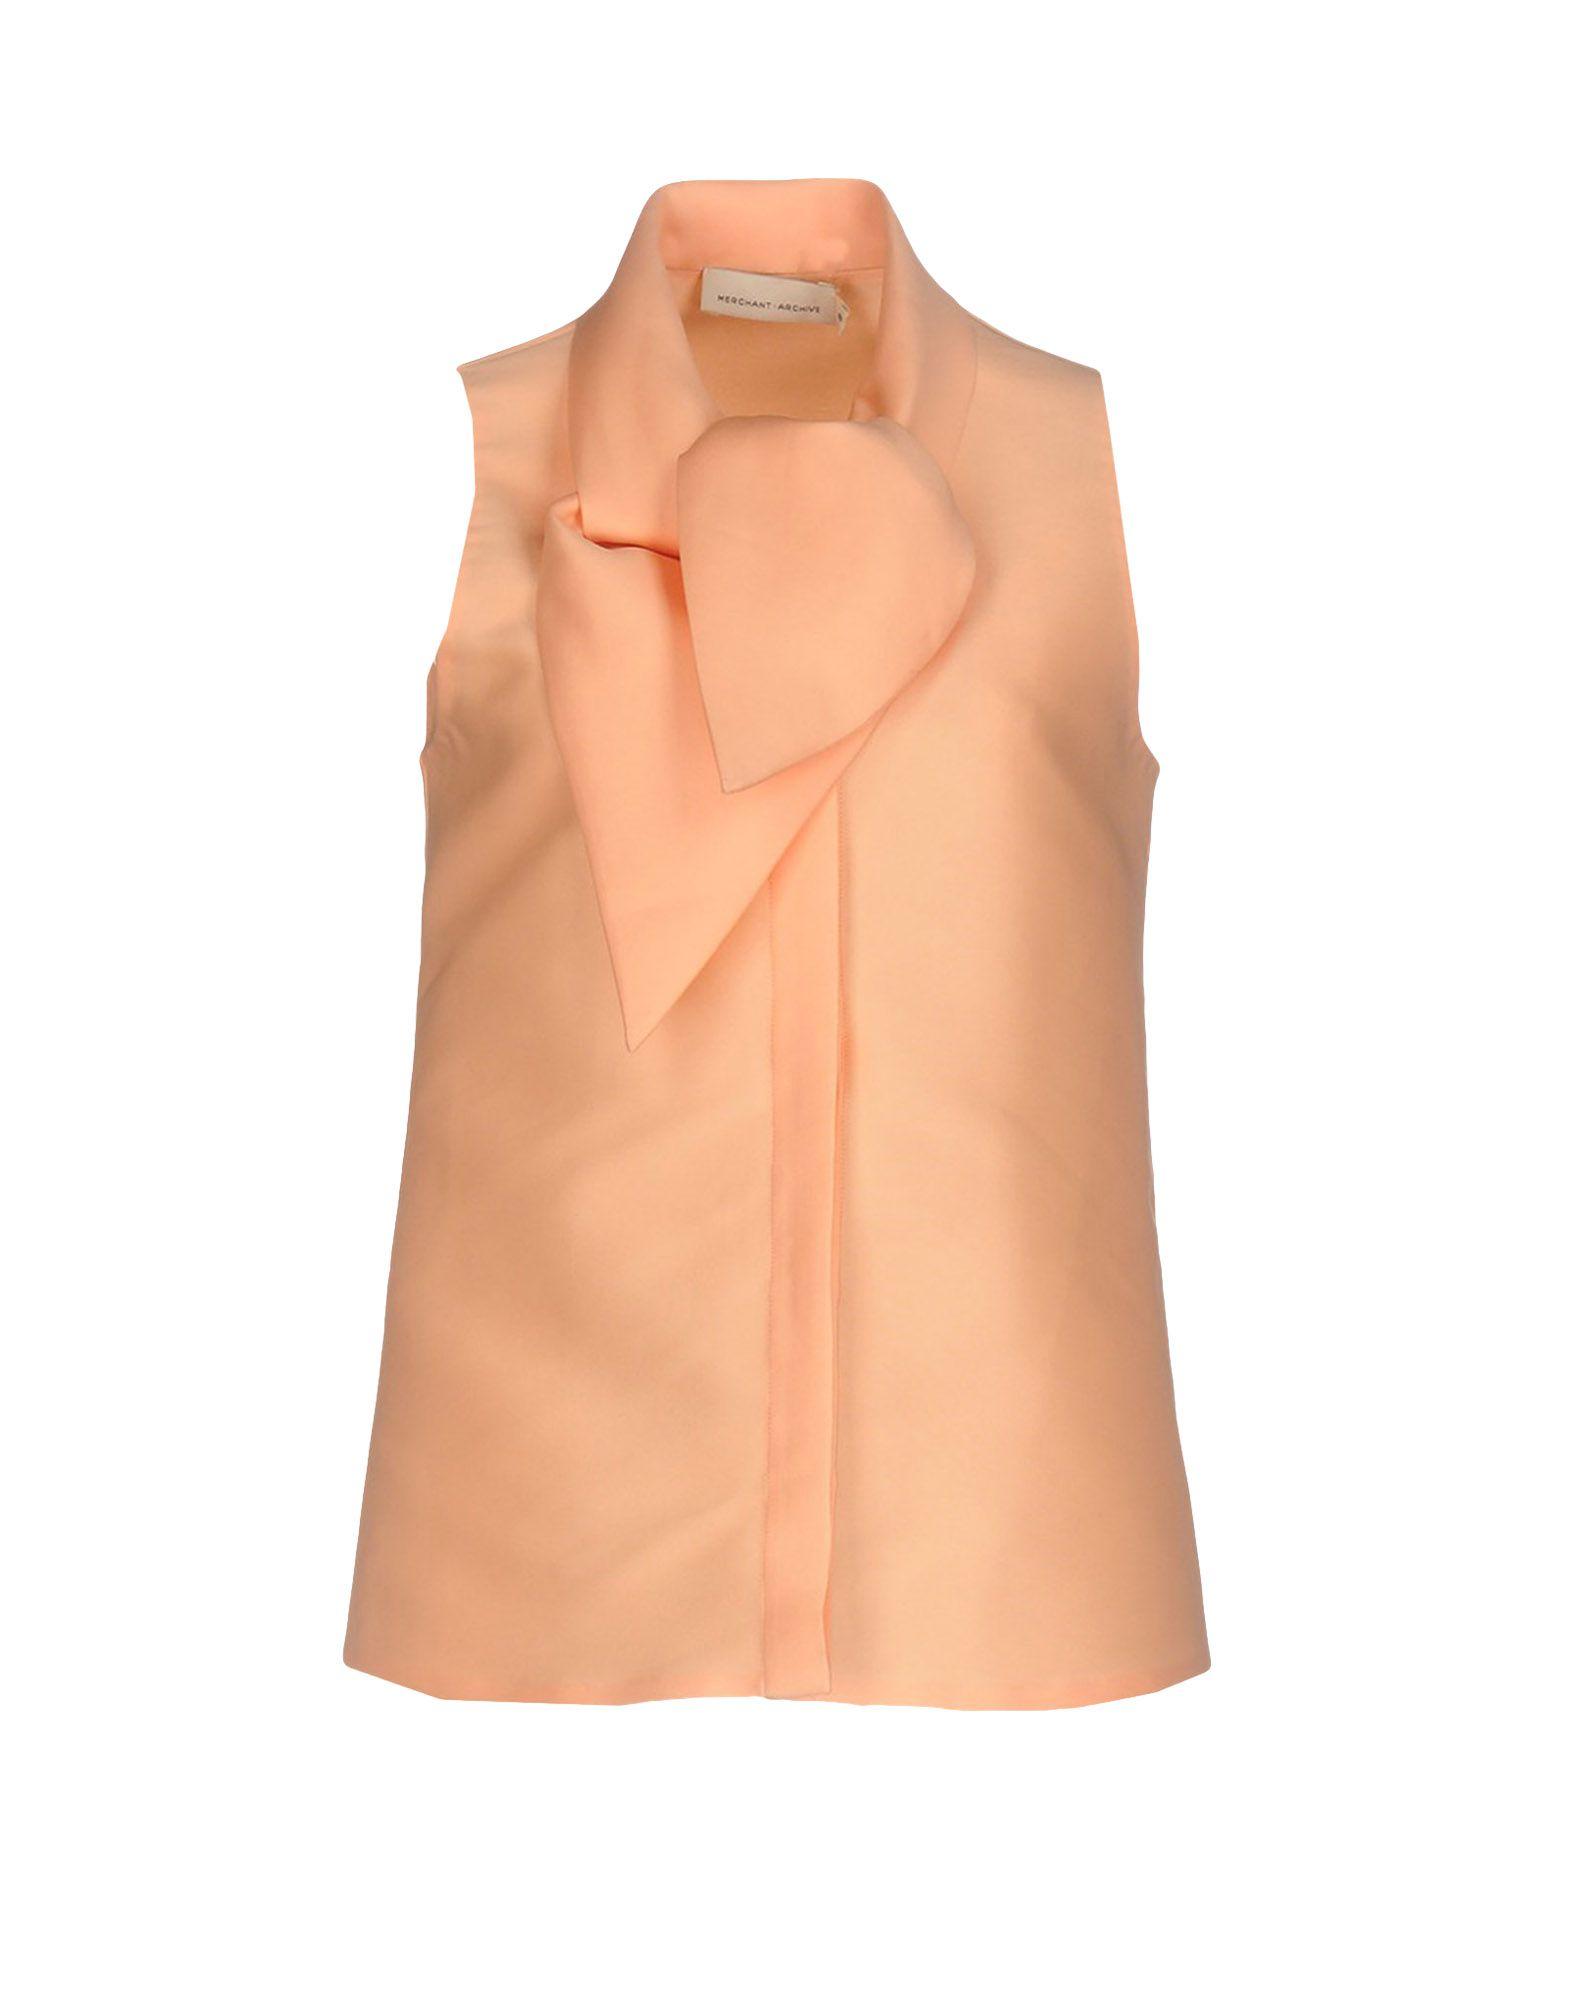 Merchant Archive Shirts & Blouses With Bow In Salmon Pink | ModeSens